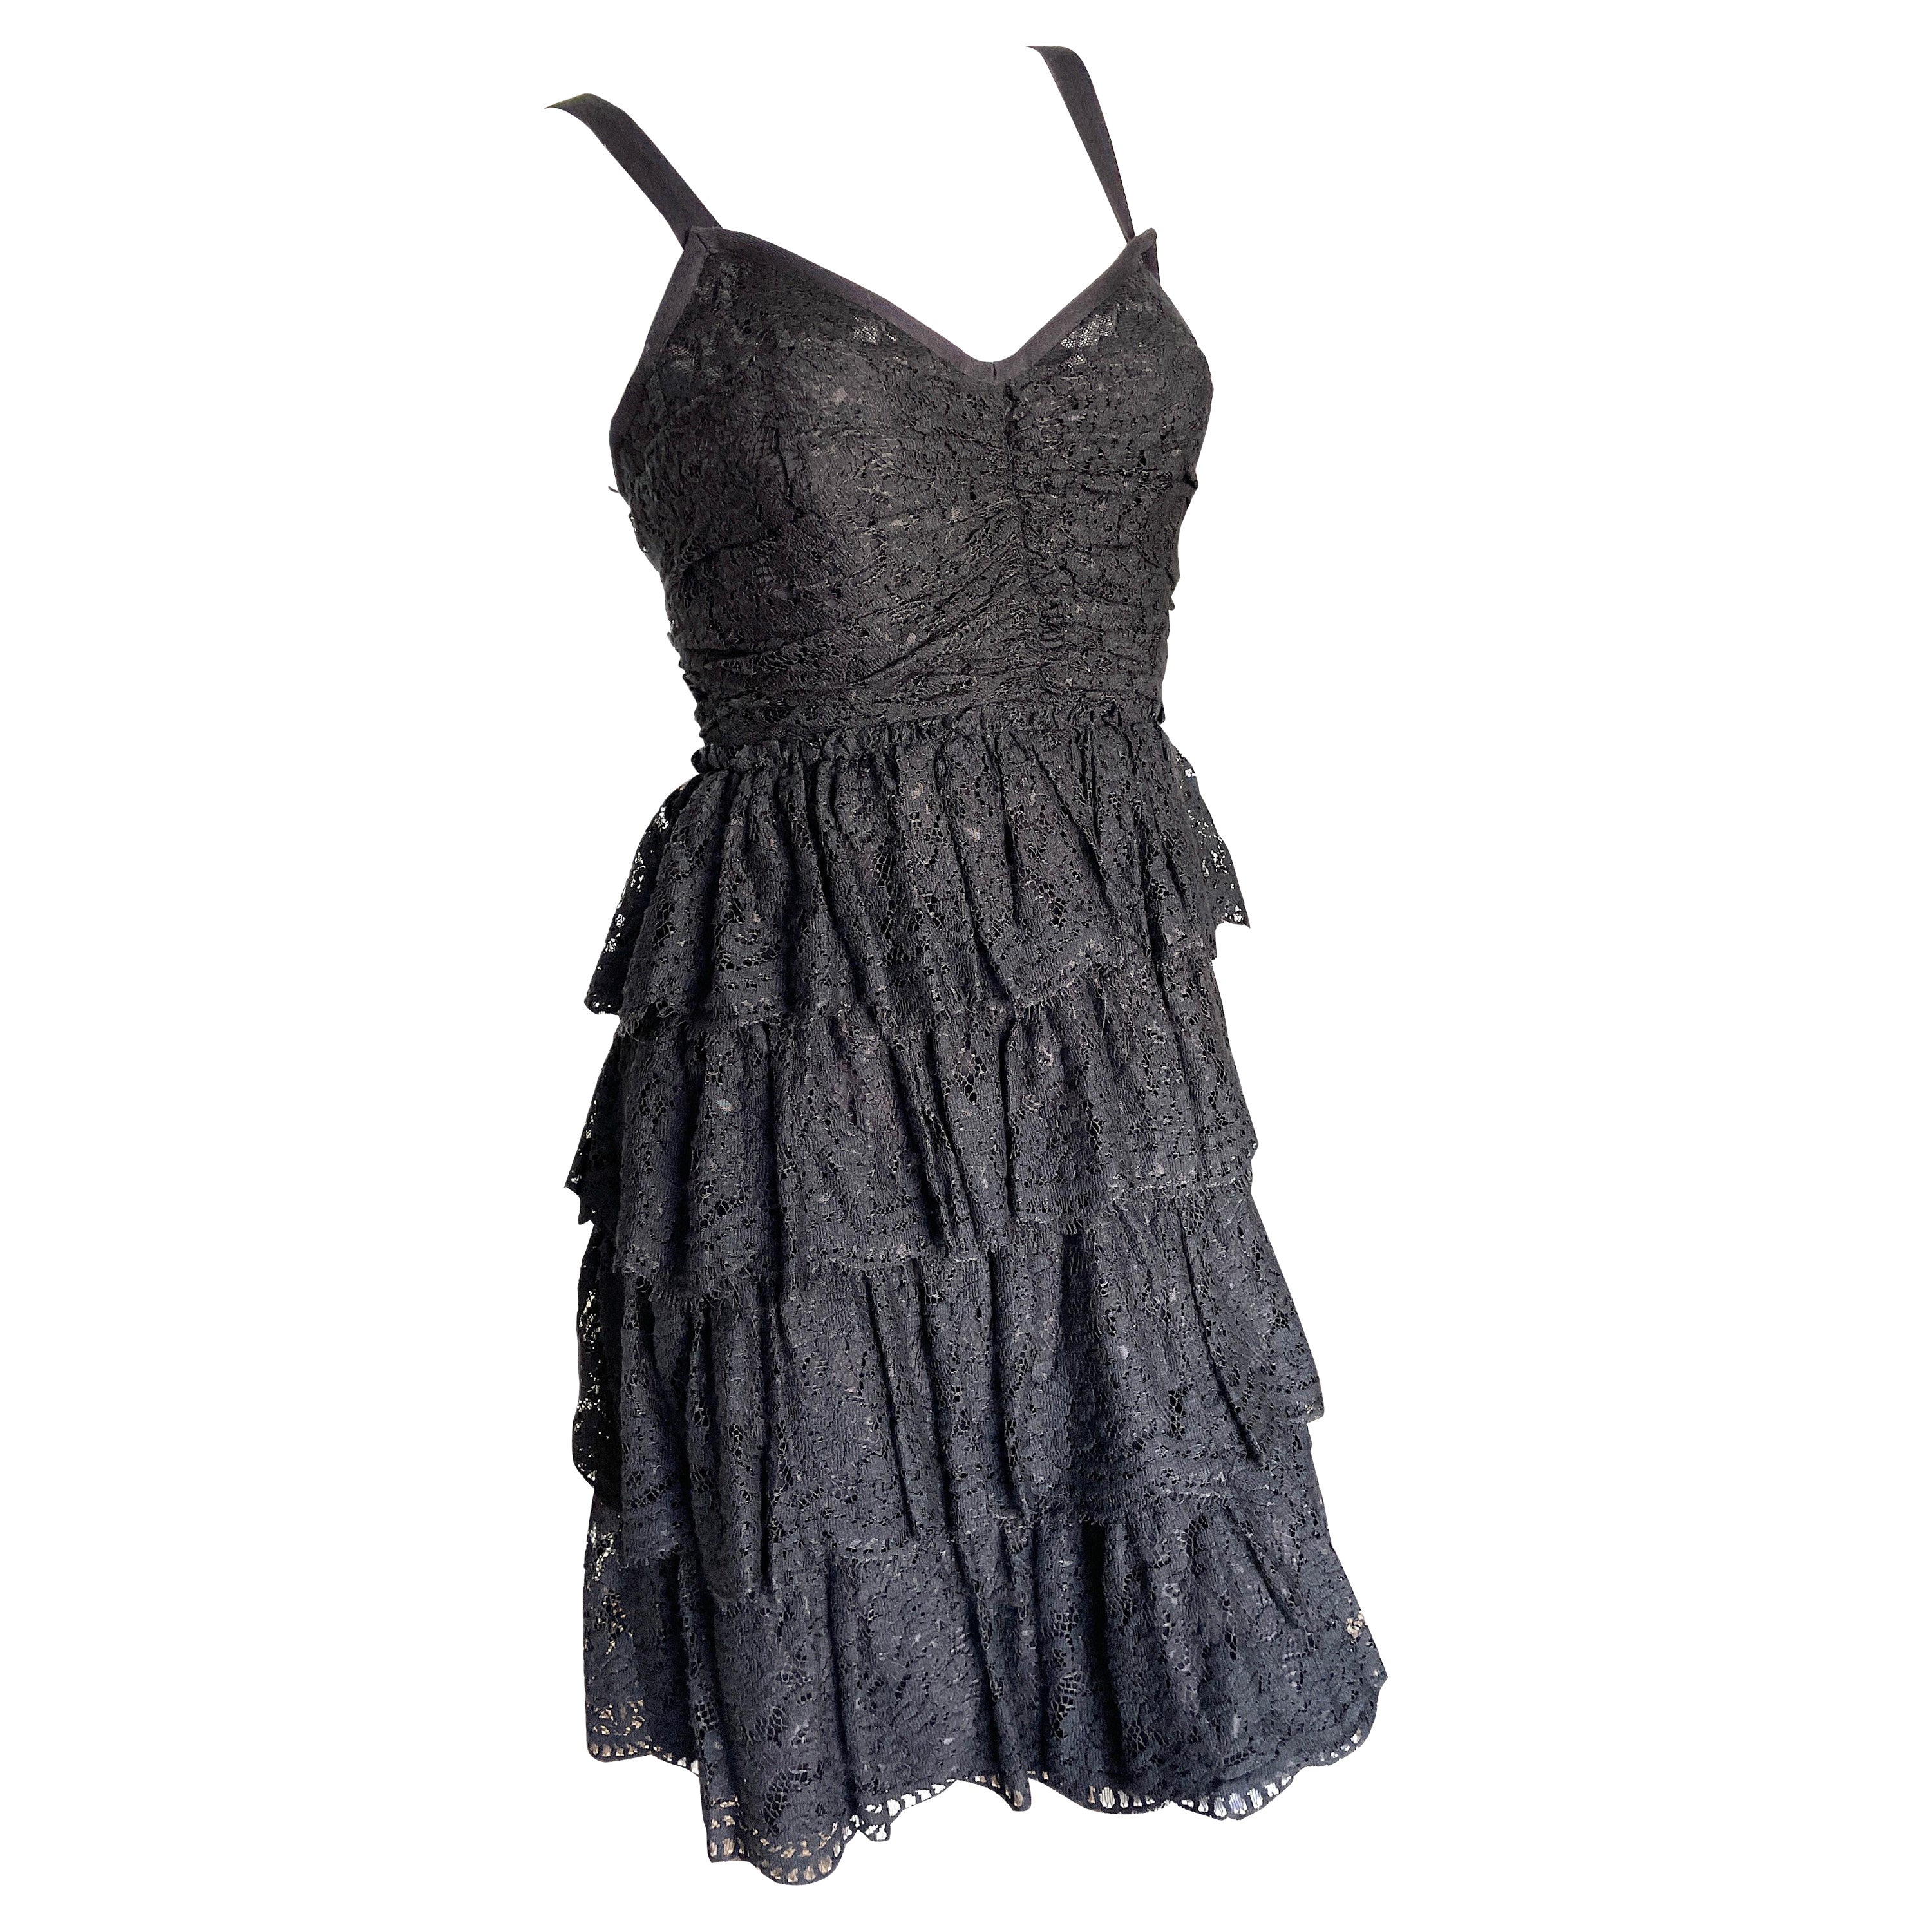 D&G by Dolce & Gabbana Vintage Black Lace Tiered Cocktail Dress    For Sale